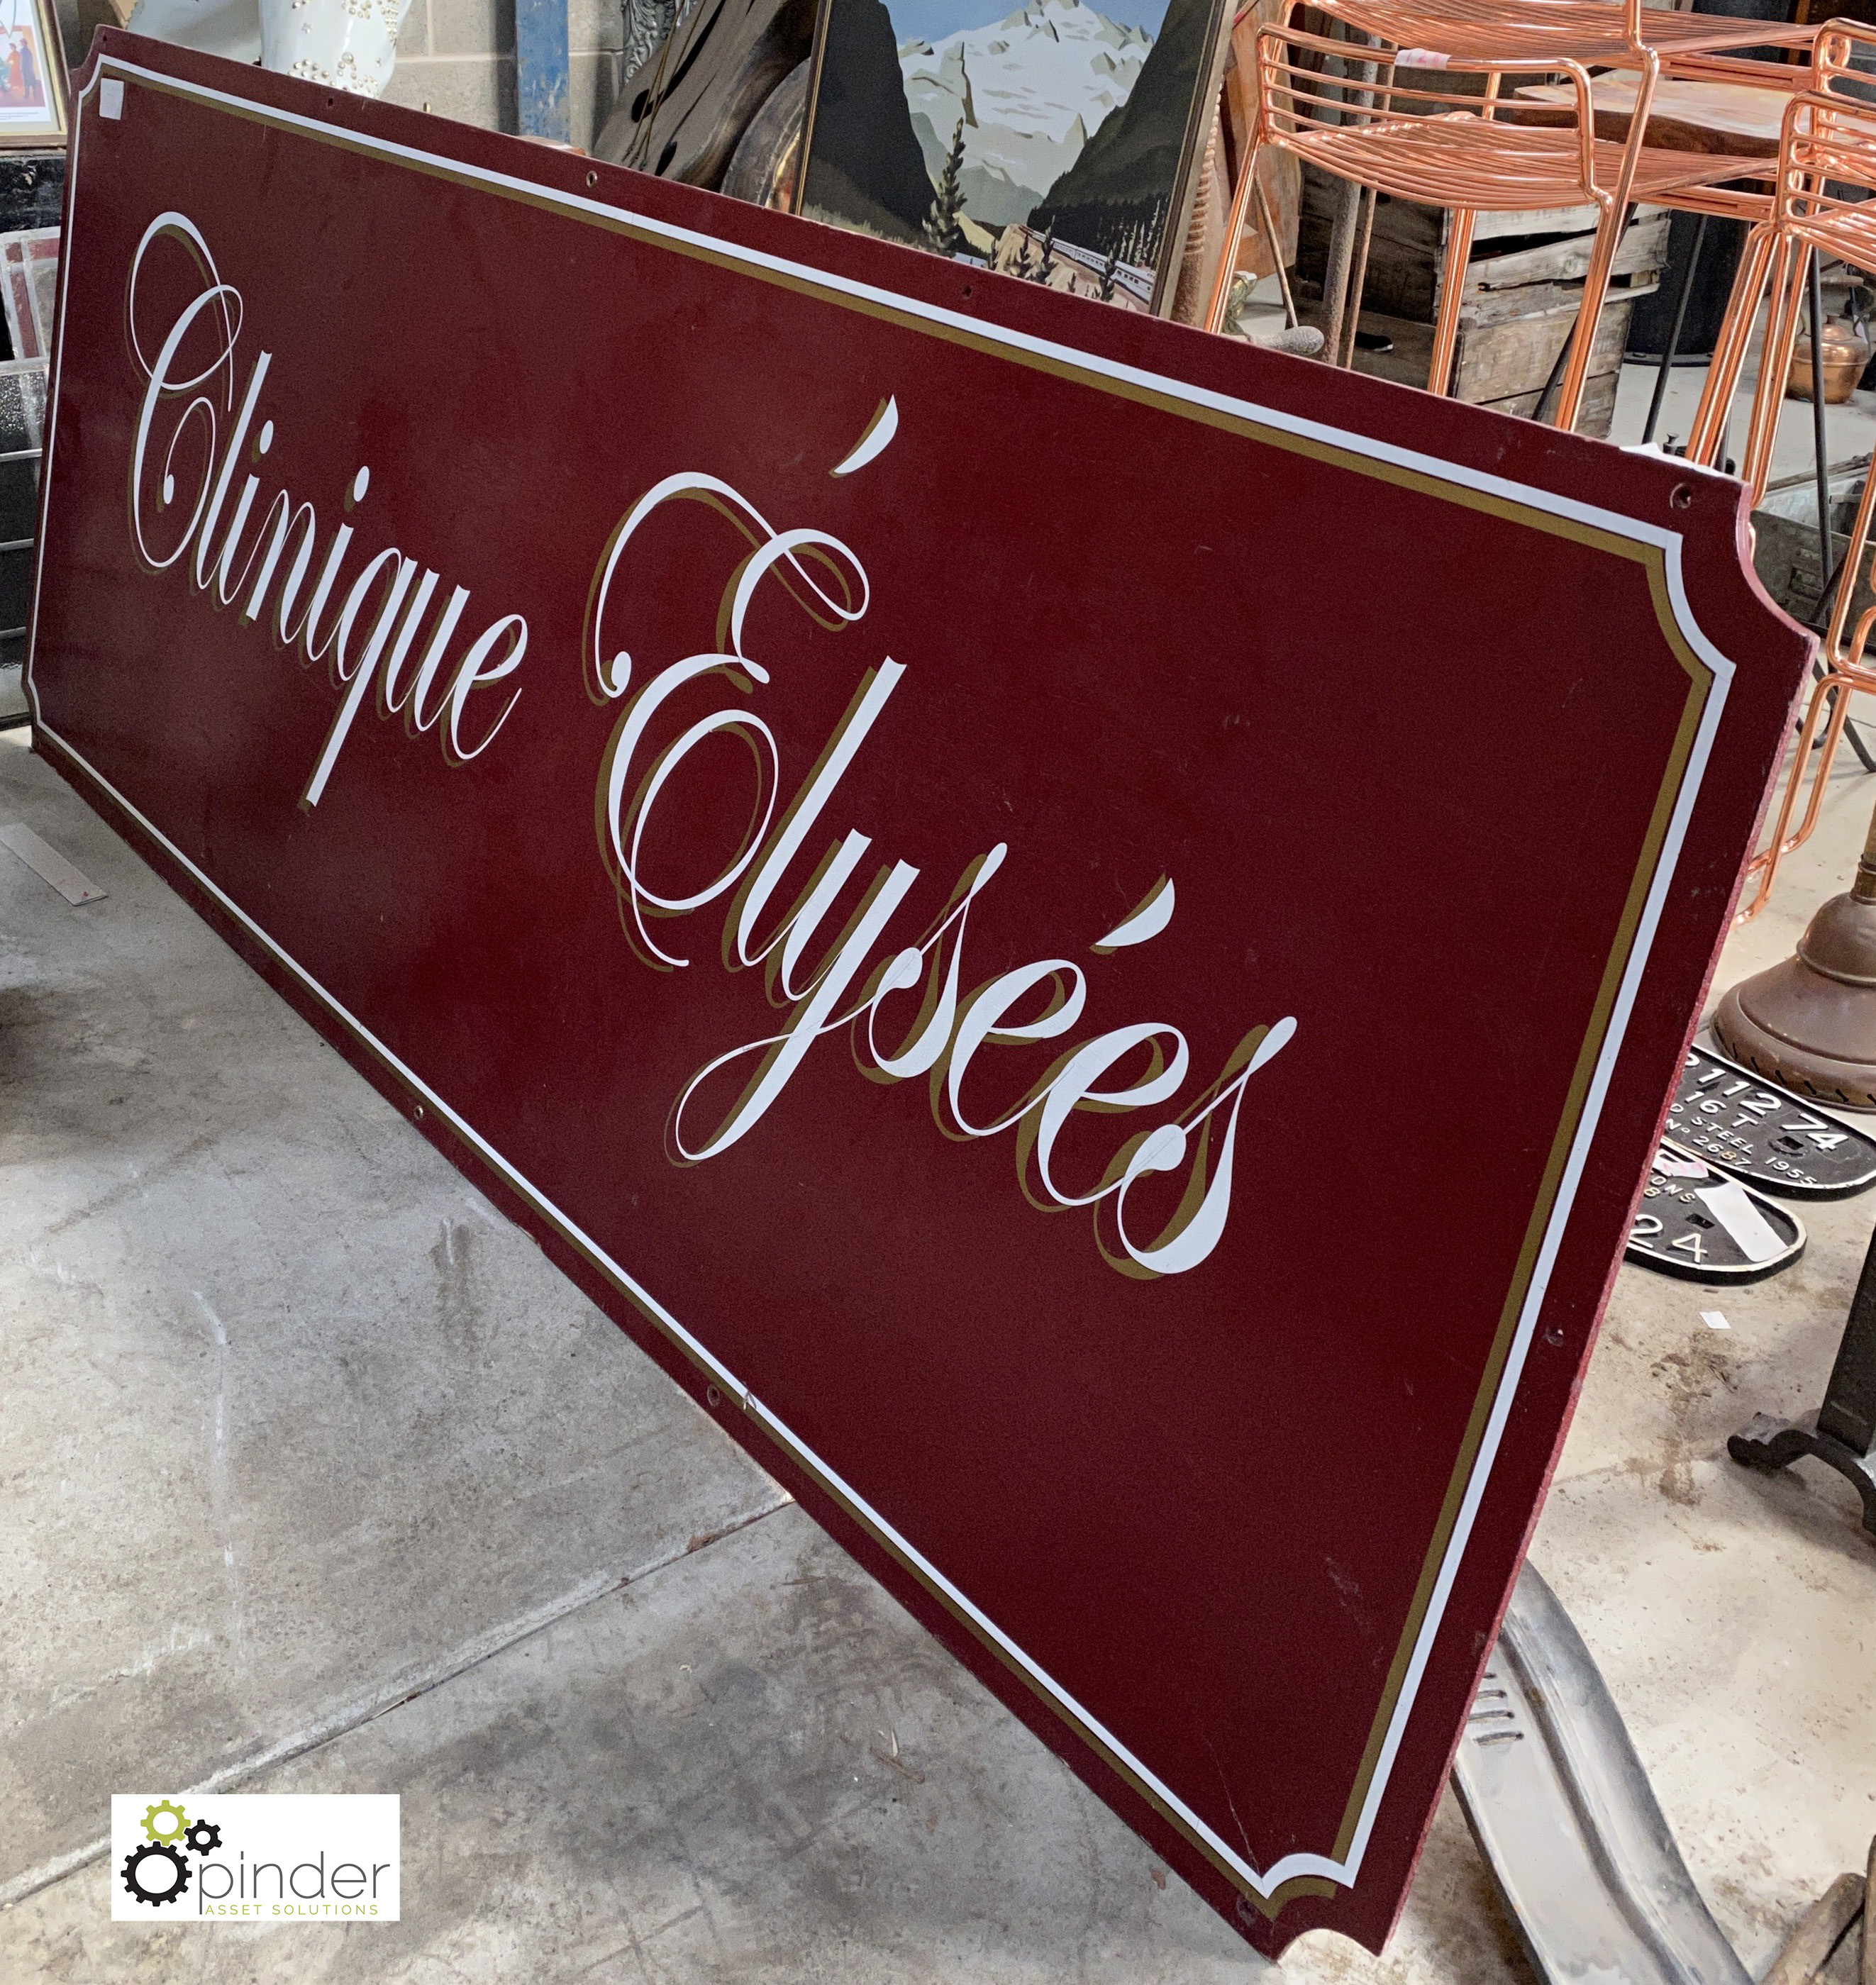 A wooden painted French Advertising Sign ‘Clinique Elysees’, 800mm high x 2010mm long - Image 3 of 4